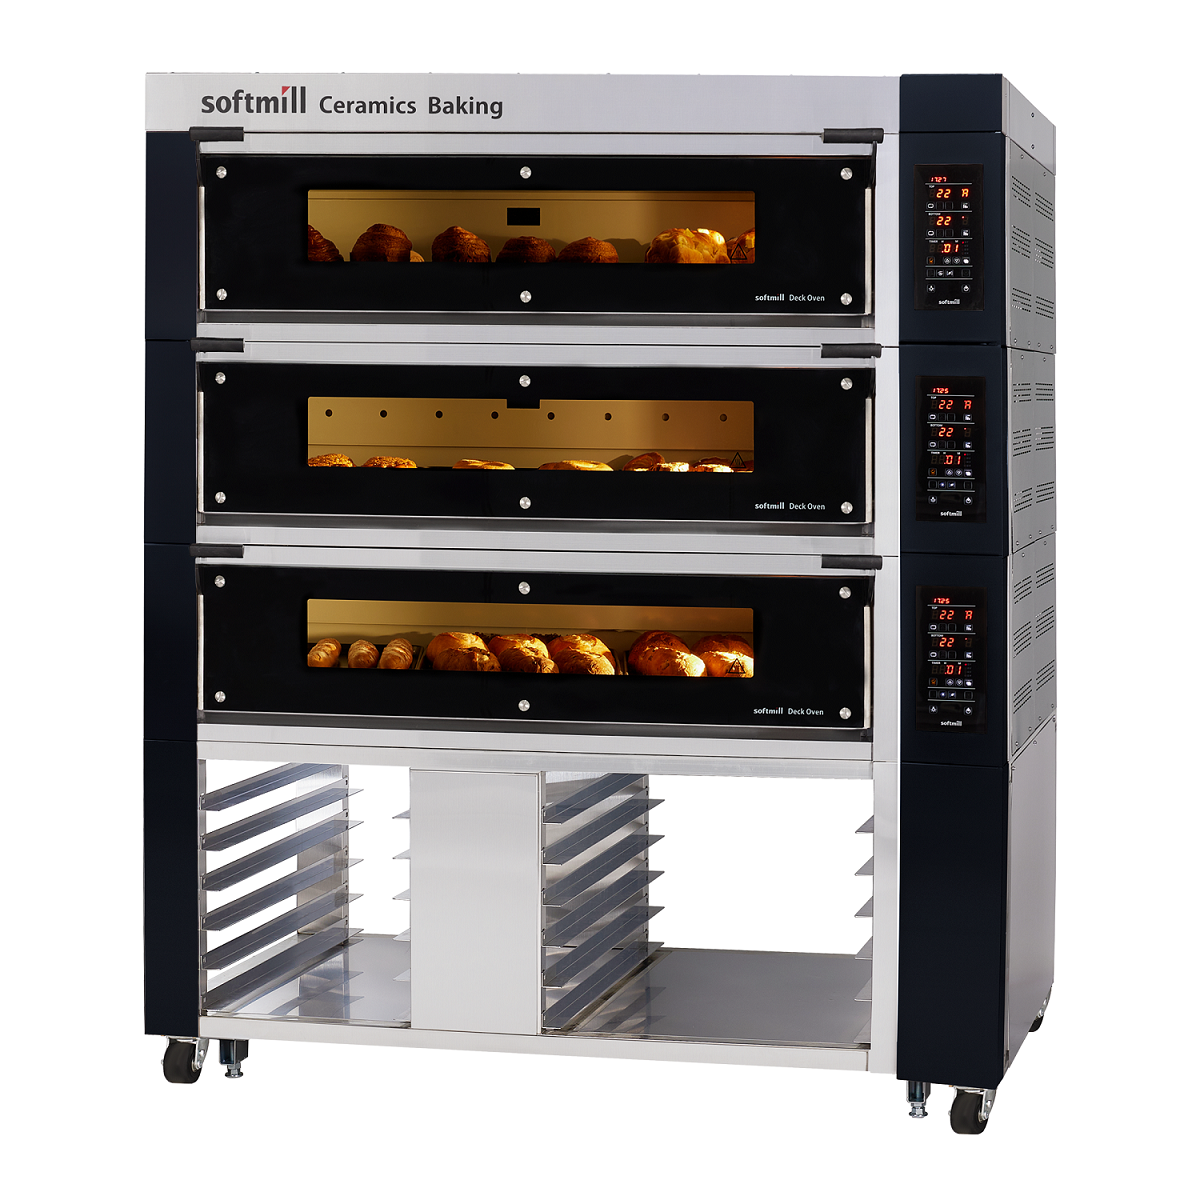 Middle Ceramic Oven 4 trays 3 tiers detail page link